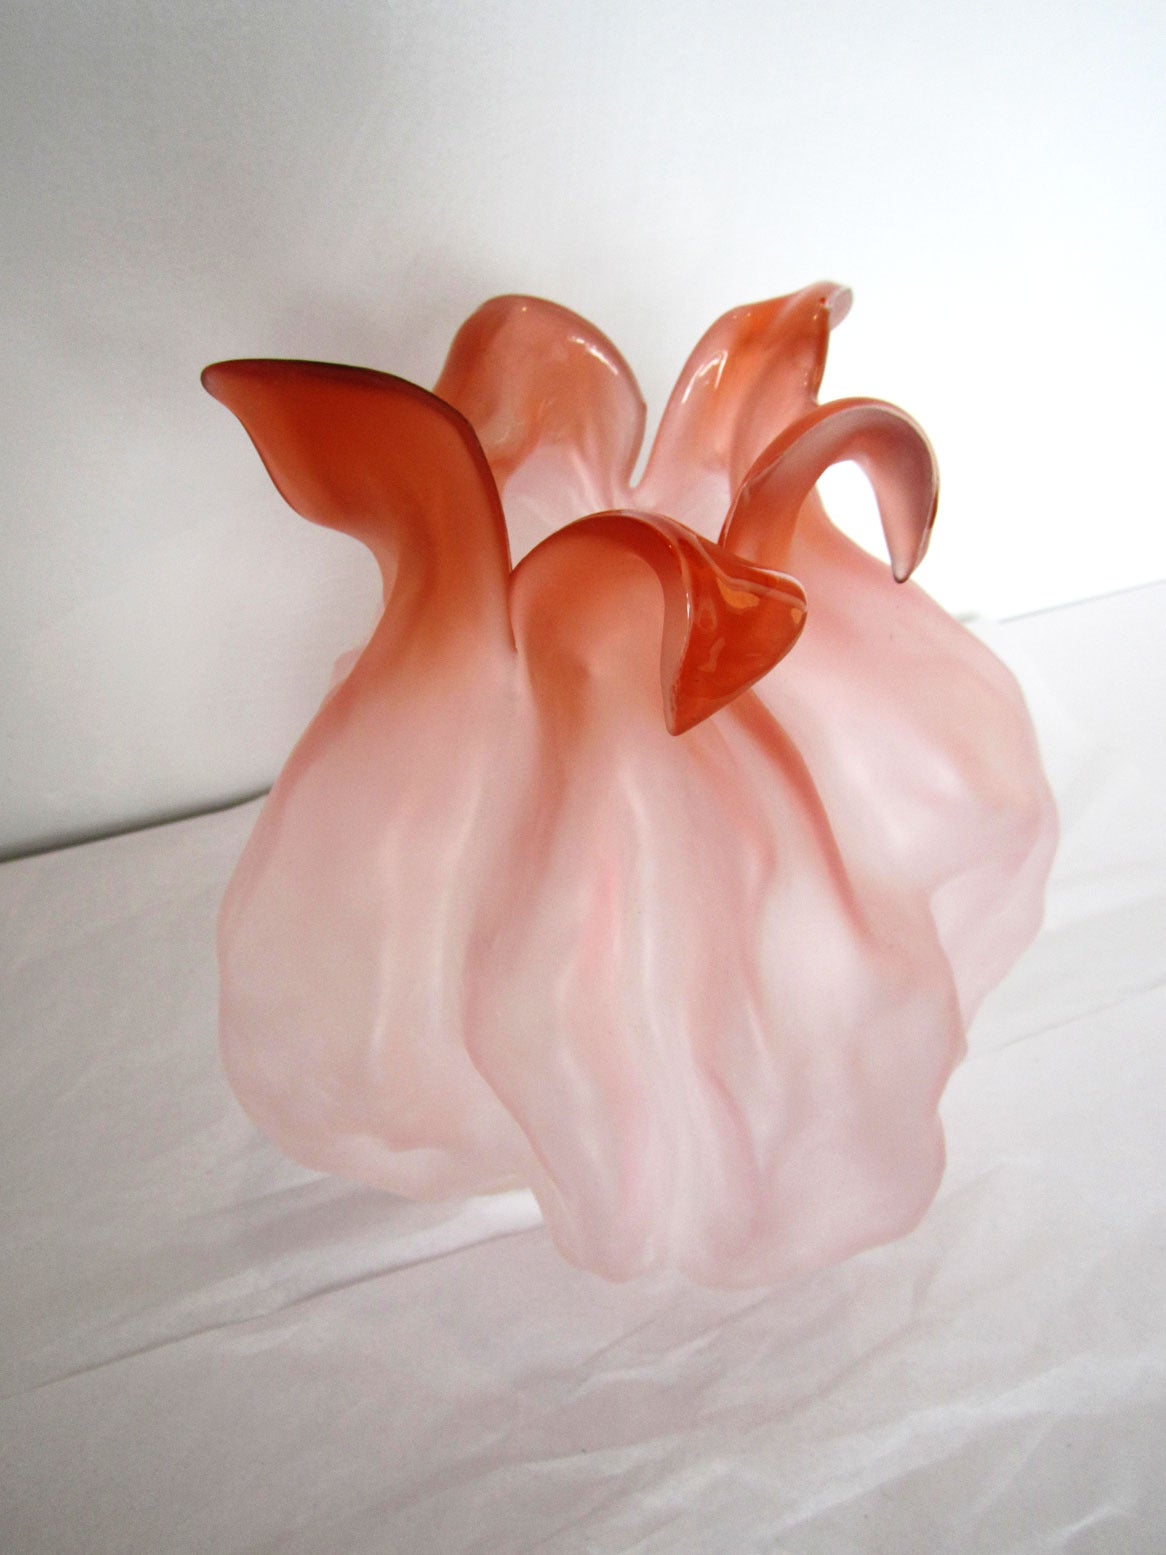 Single pink organic flower vase signed and numbered on the bottom.